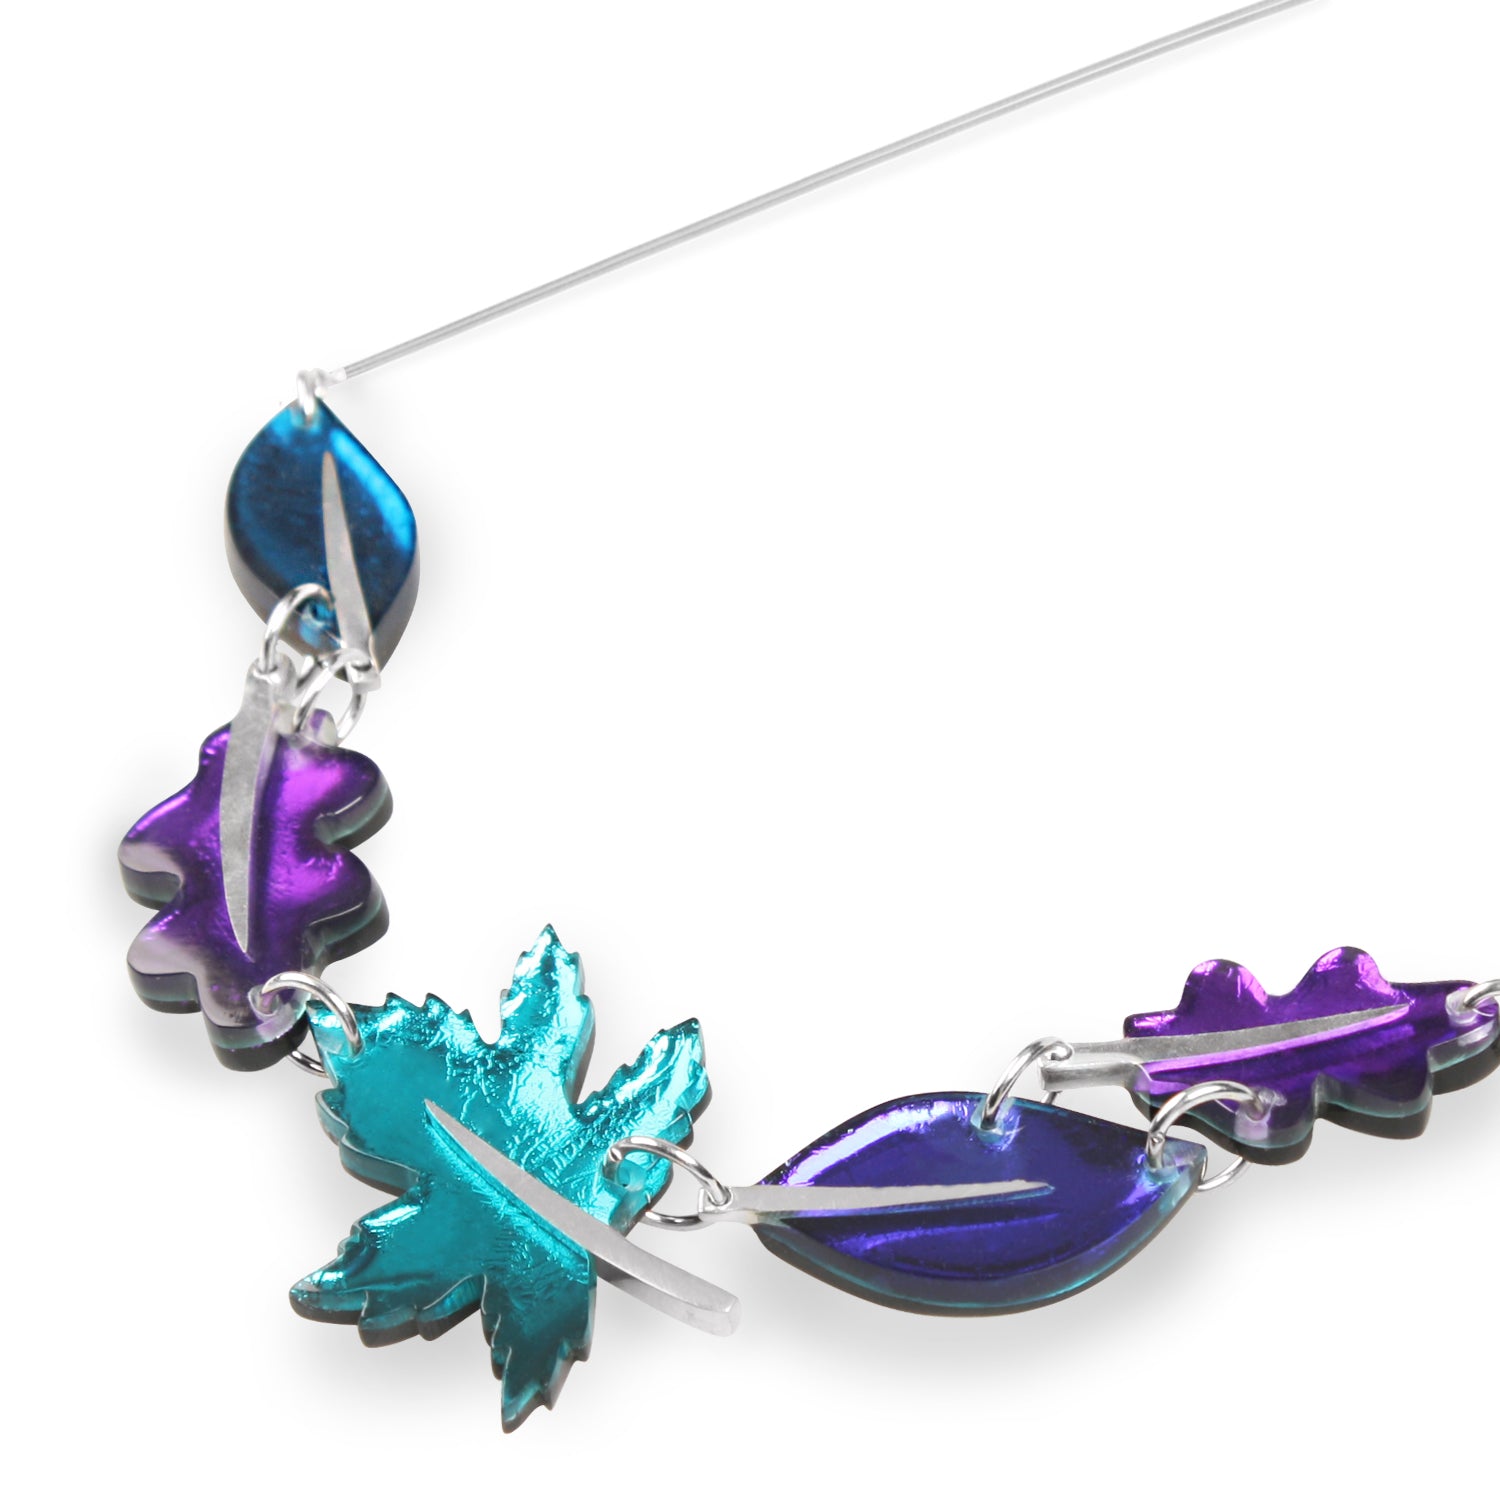 Peacock Assorted Leaf Combi Necklace